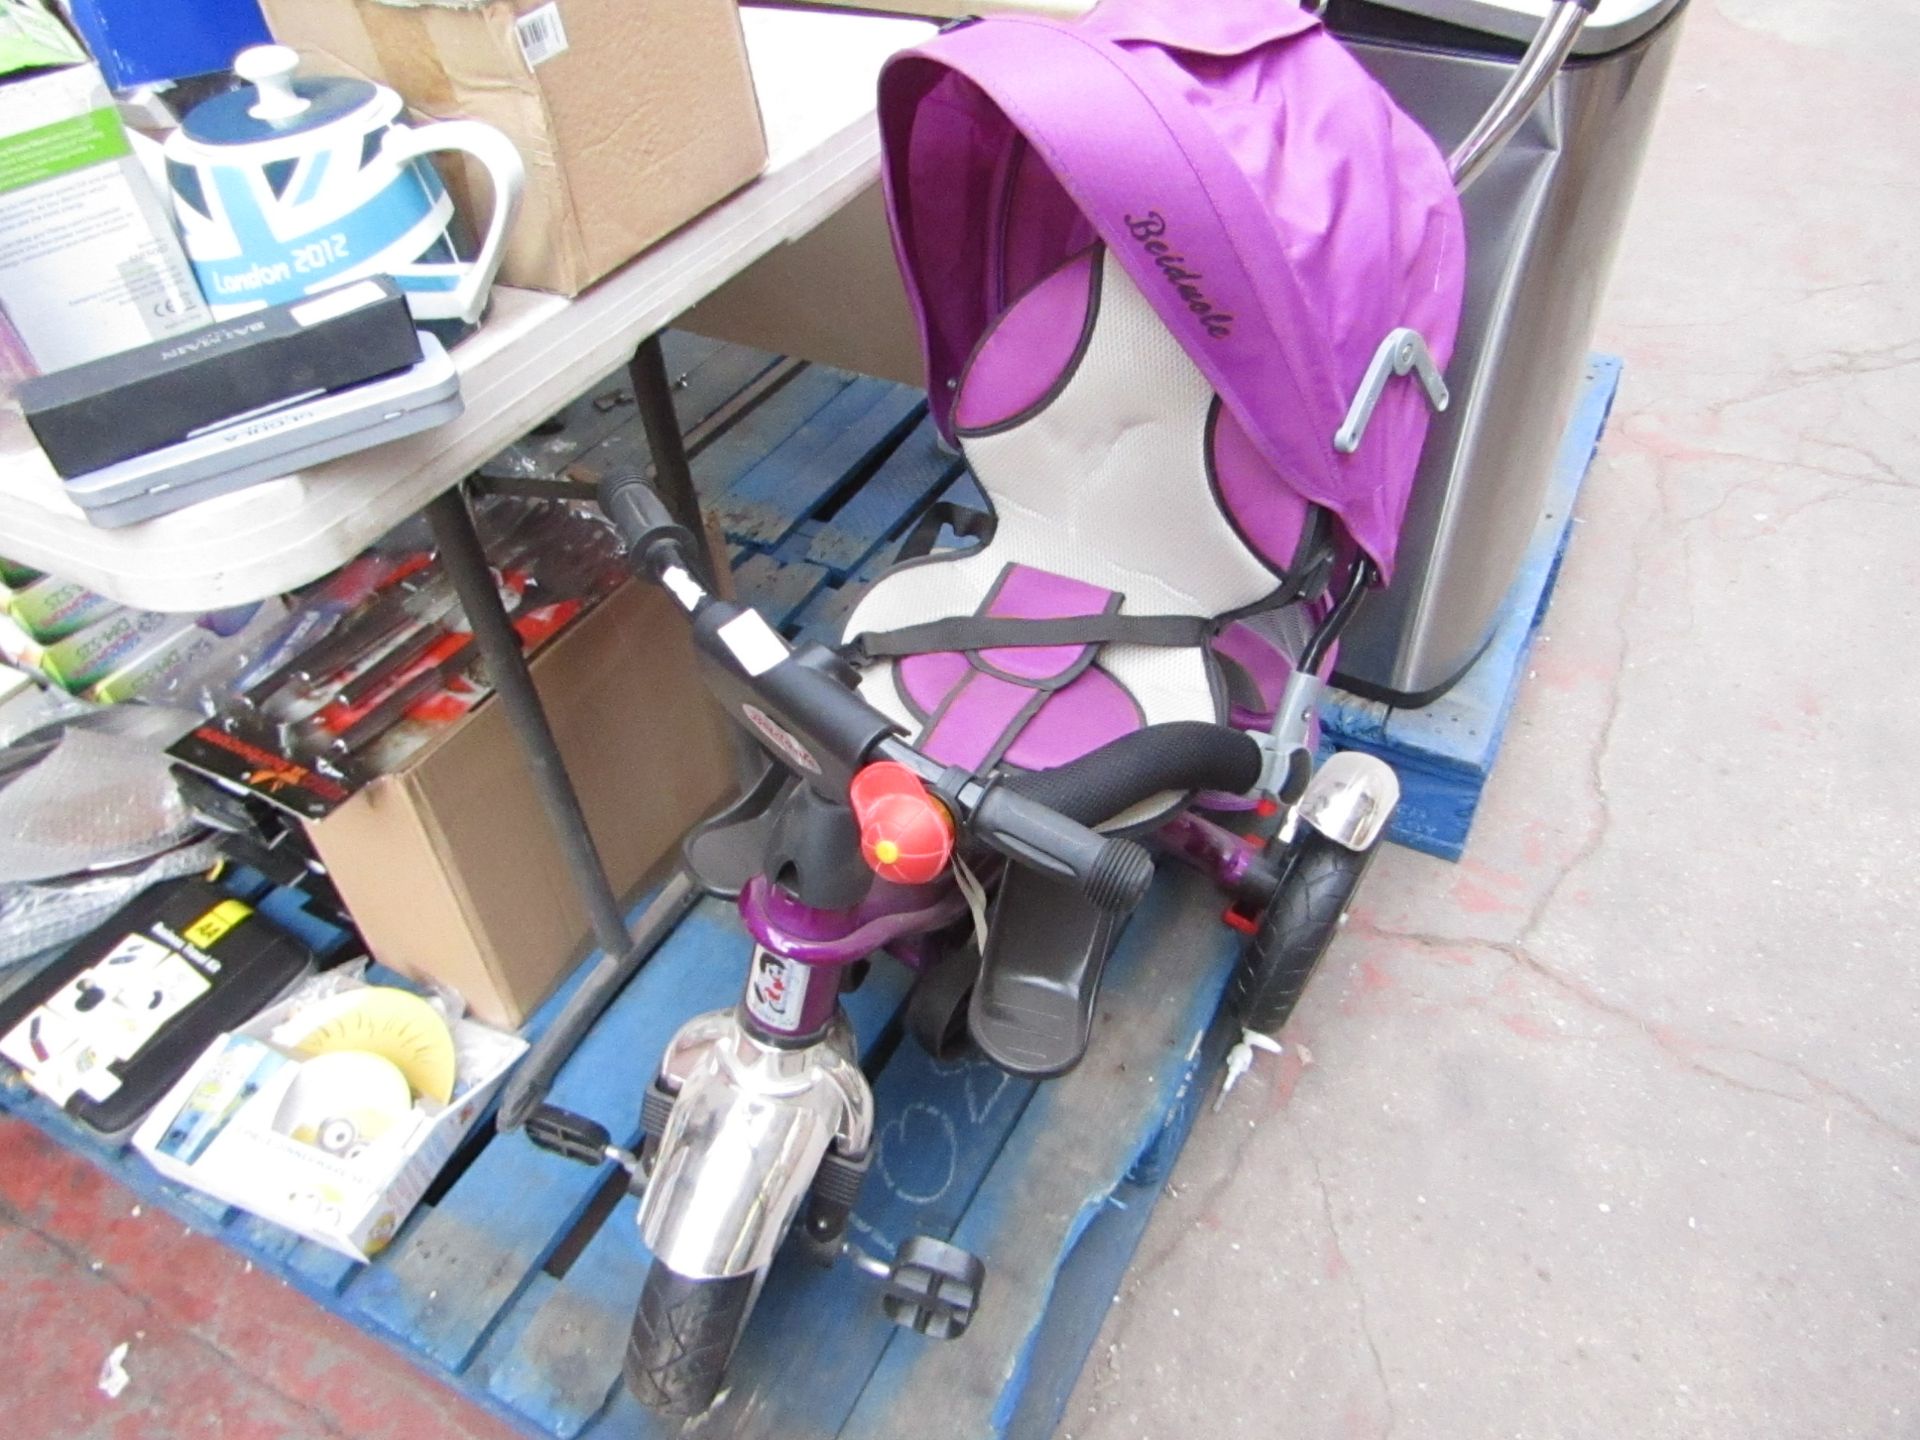 Childrens trike, complete but needs to be built properly as it is unusable.